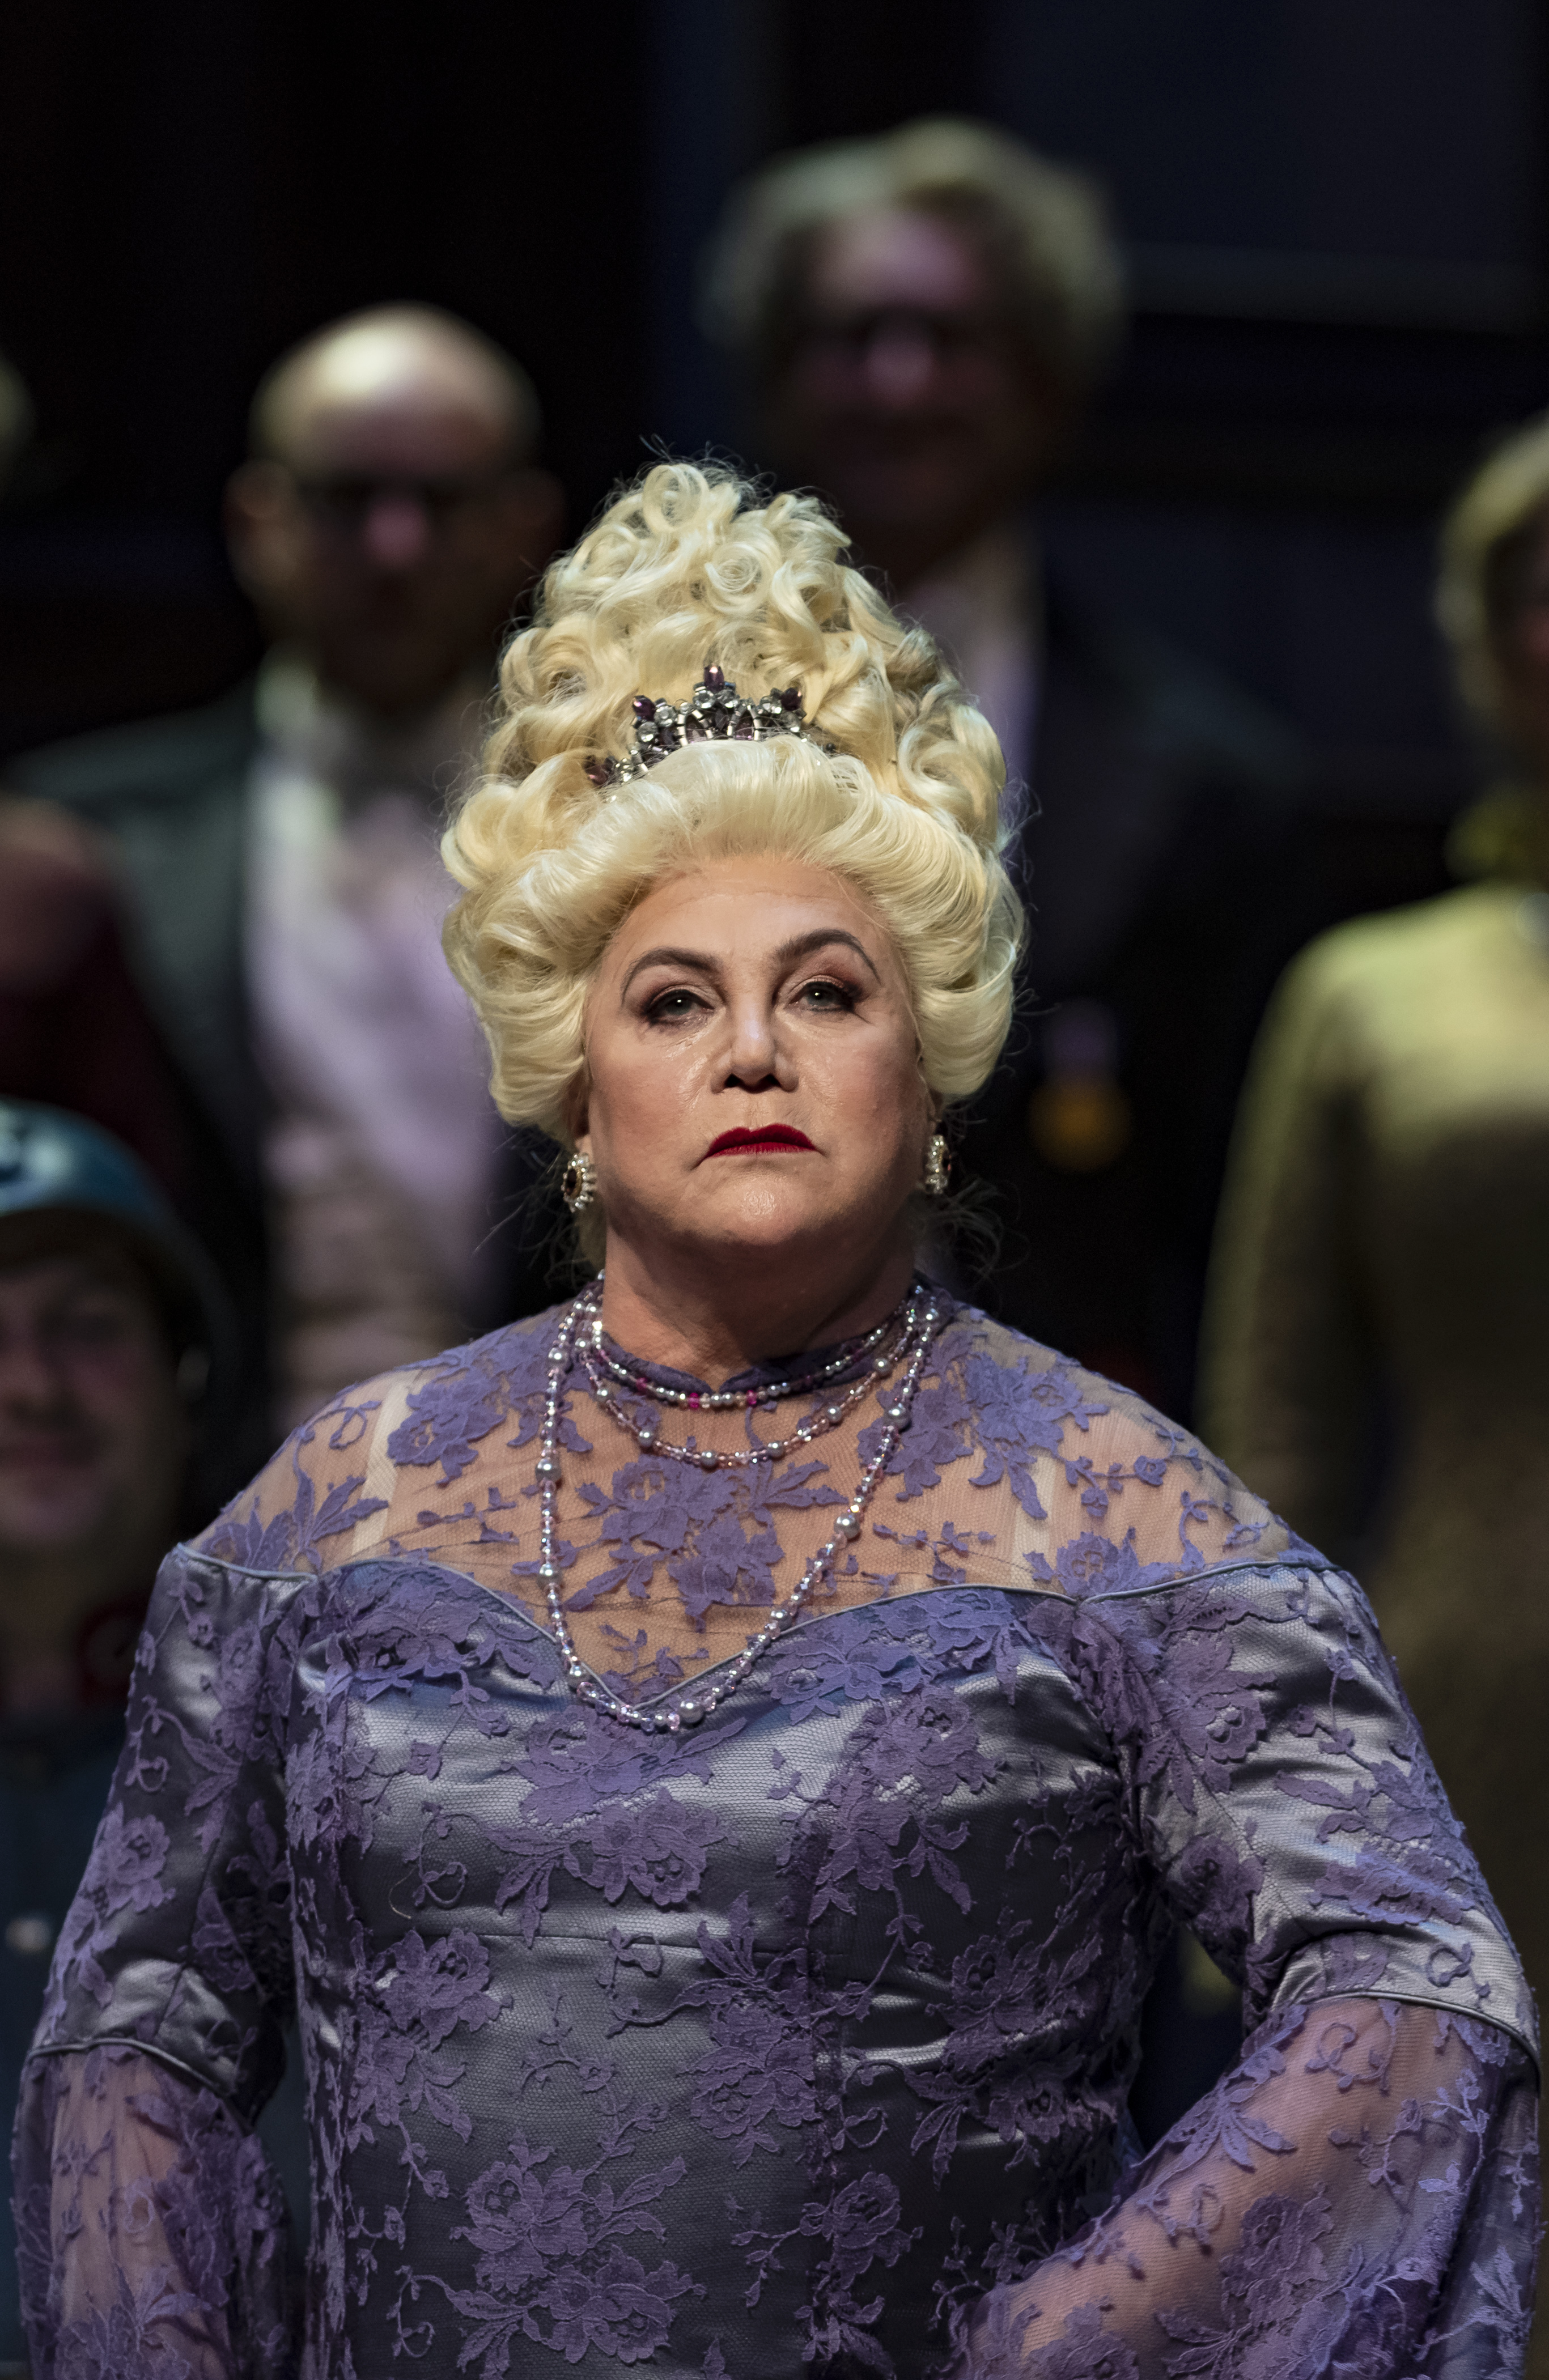 Kathleen Turner performiing in the "La Fille du Regiment" production in New York in 2019 | Source: Getty Images